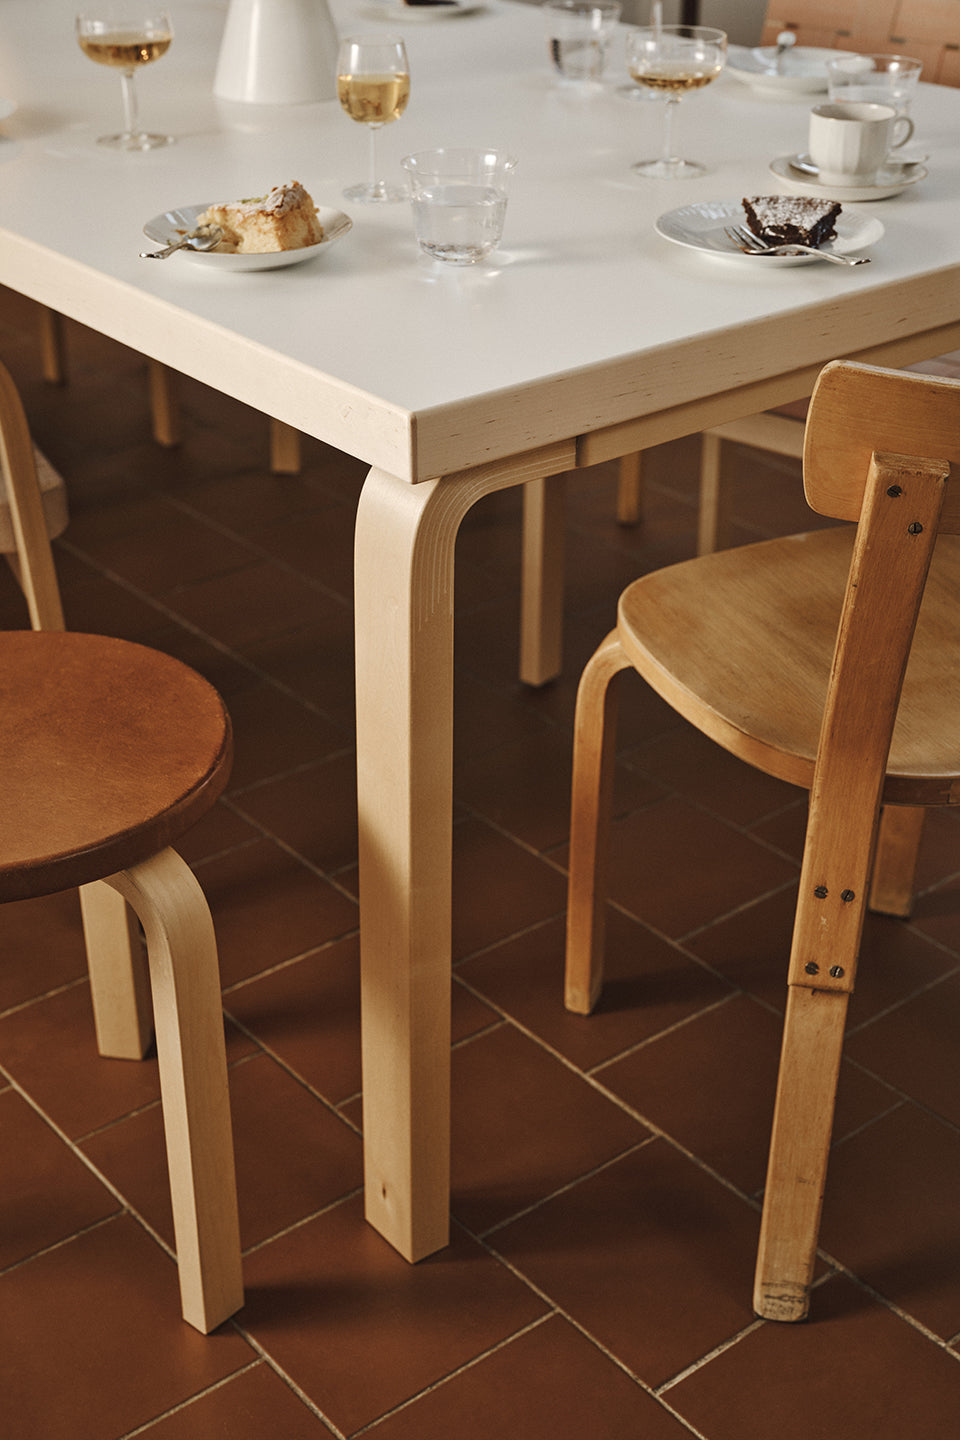 The Aalto Table